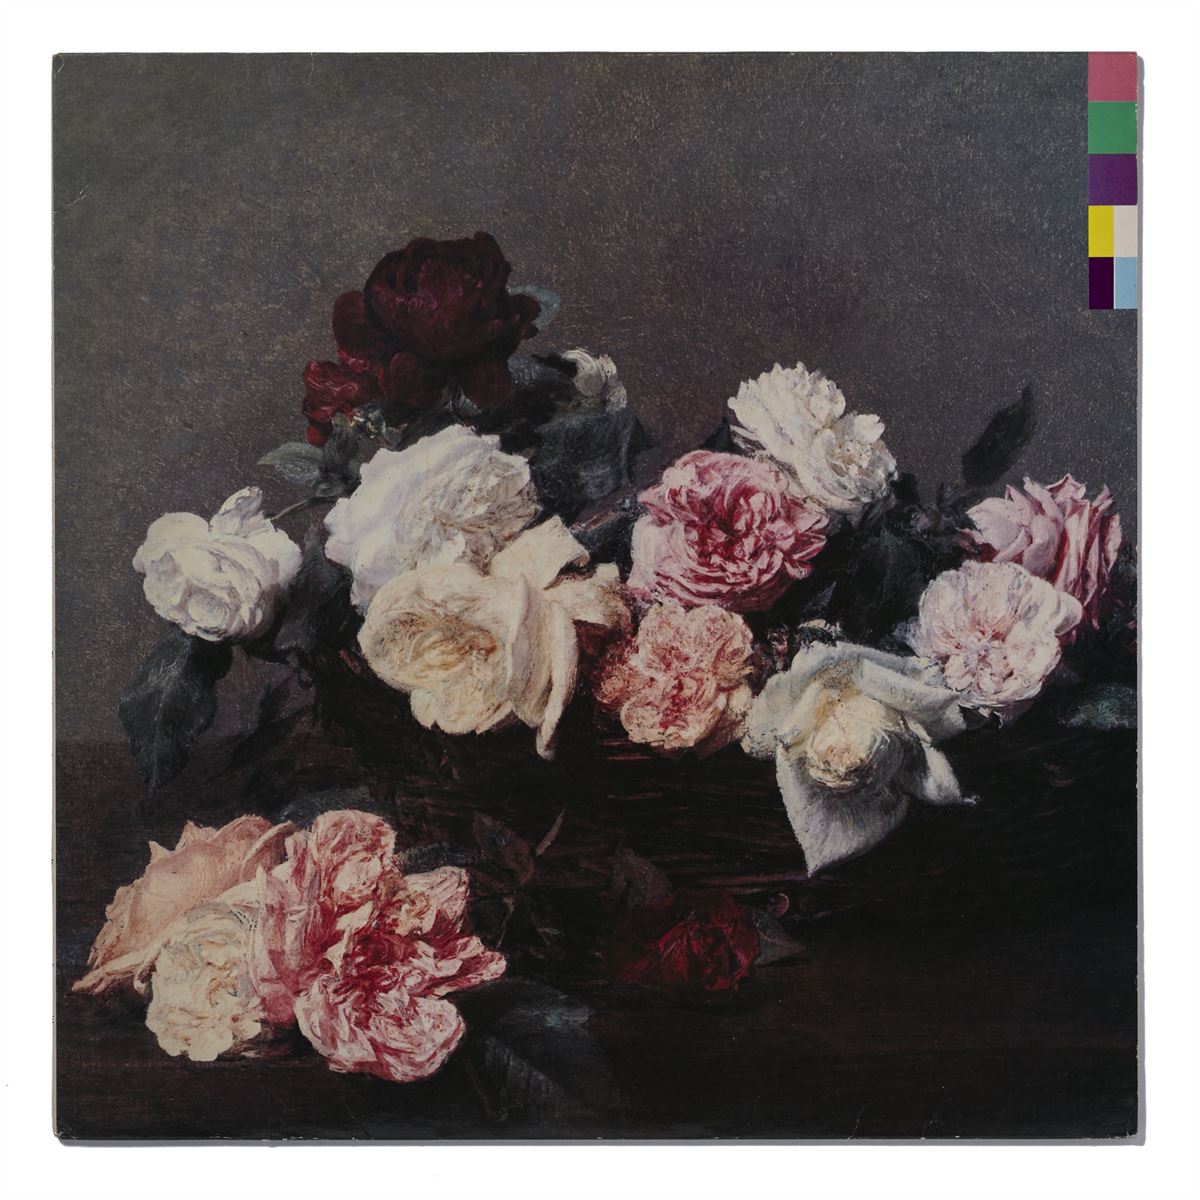 Depeche Mode. TOP 3 - Página 6 20230404150844_nwe-order-power-corruption-and-lies_amp_w1200